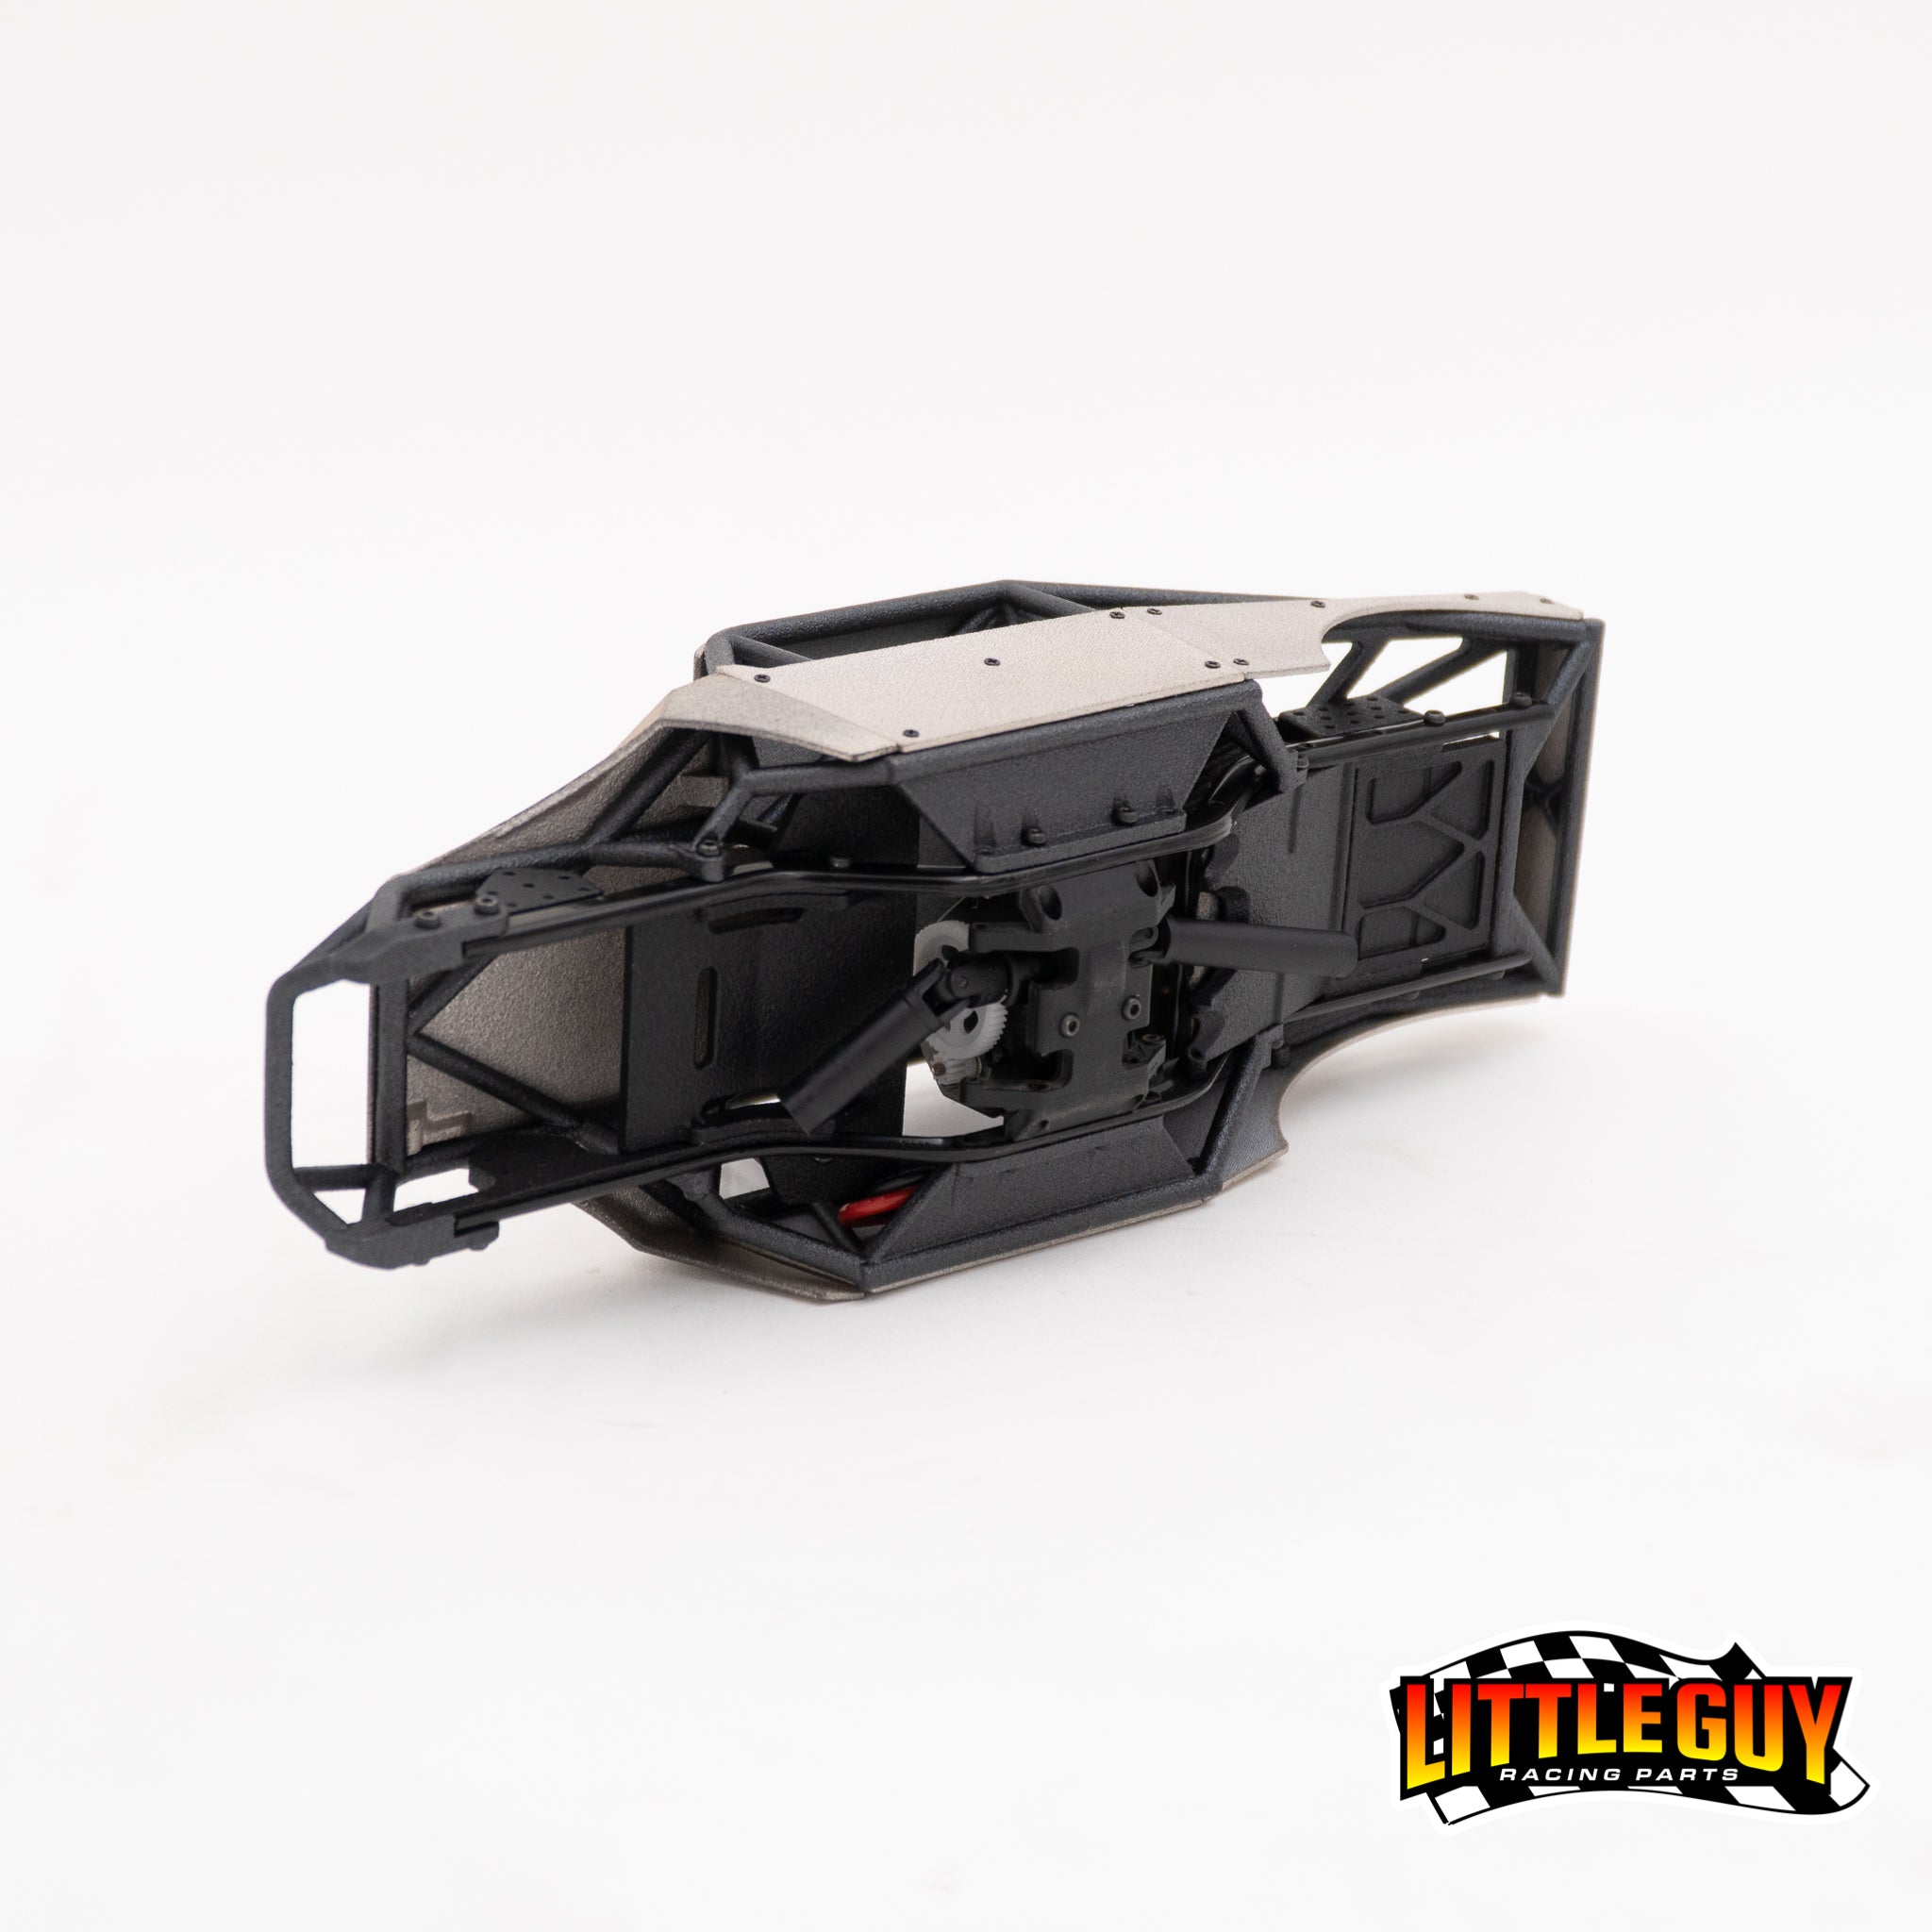 ULTRA24 CHASSIS KIT